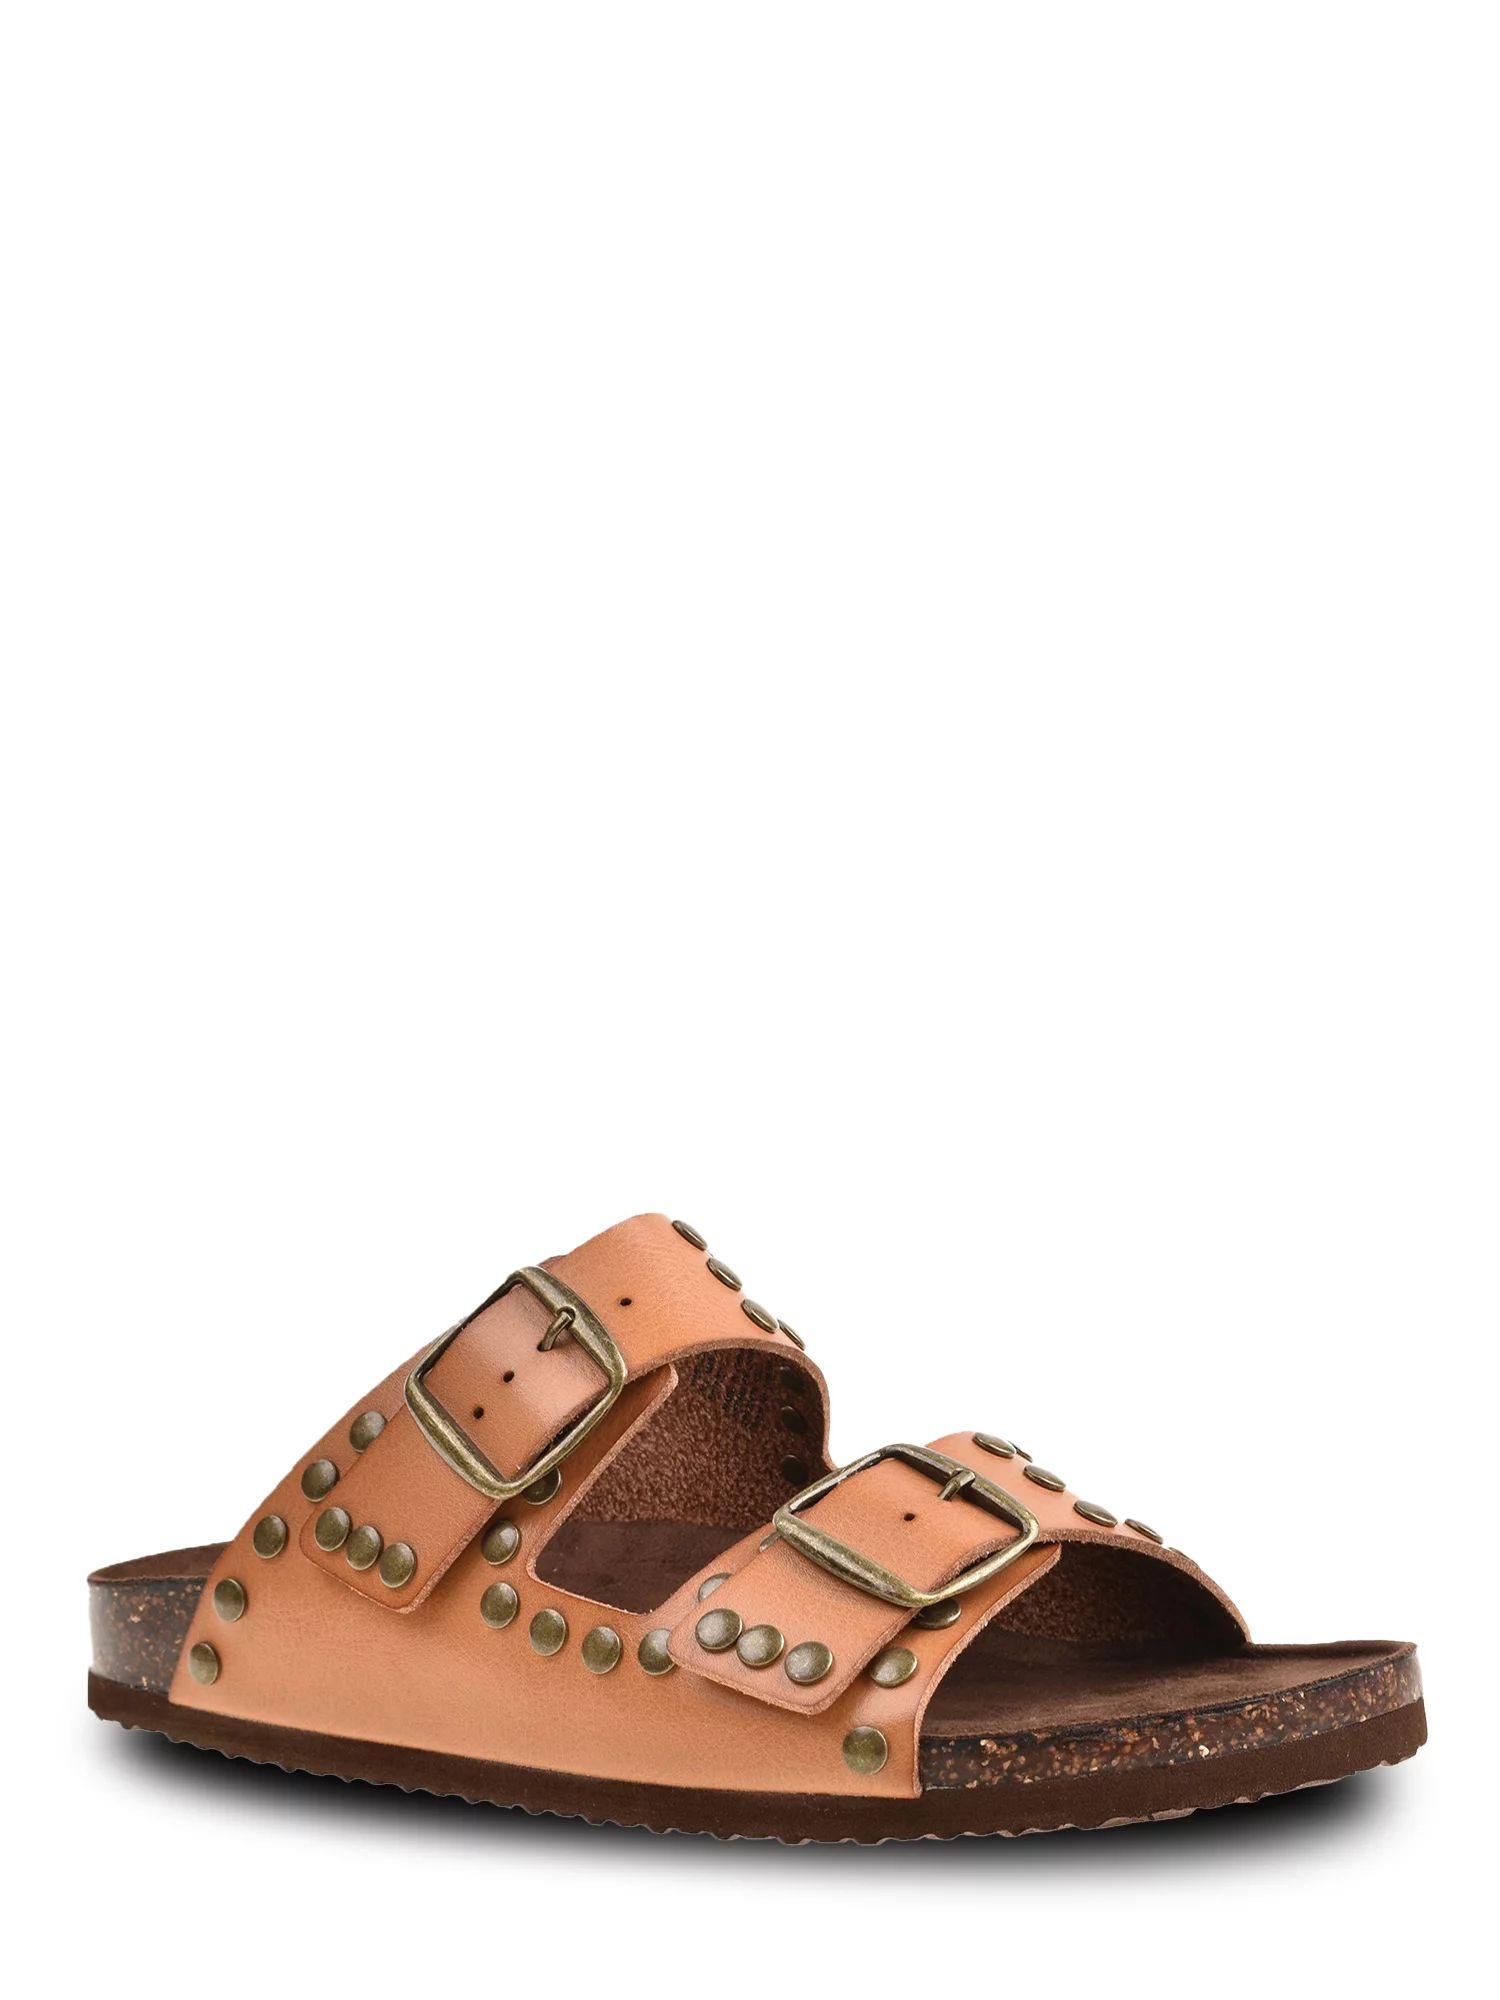 PORTLAND by Portland Boot Company Women's Studded Footbed Sandals | Walmart (US)